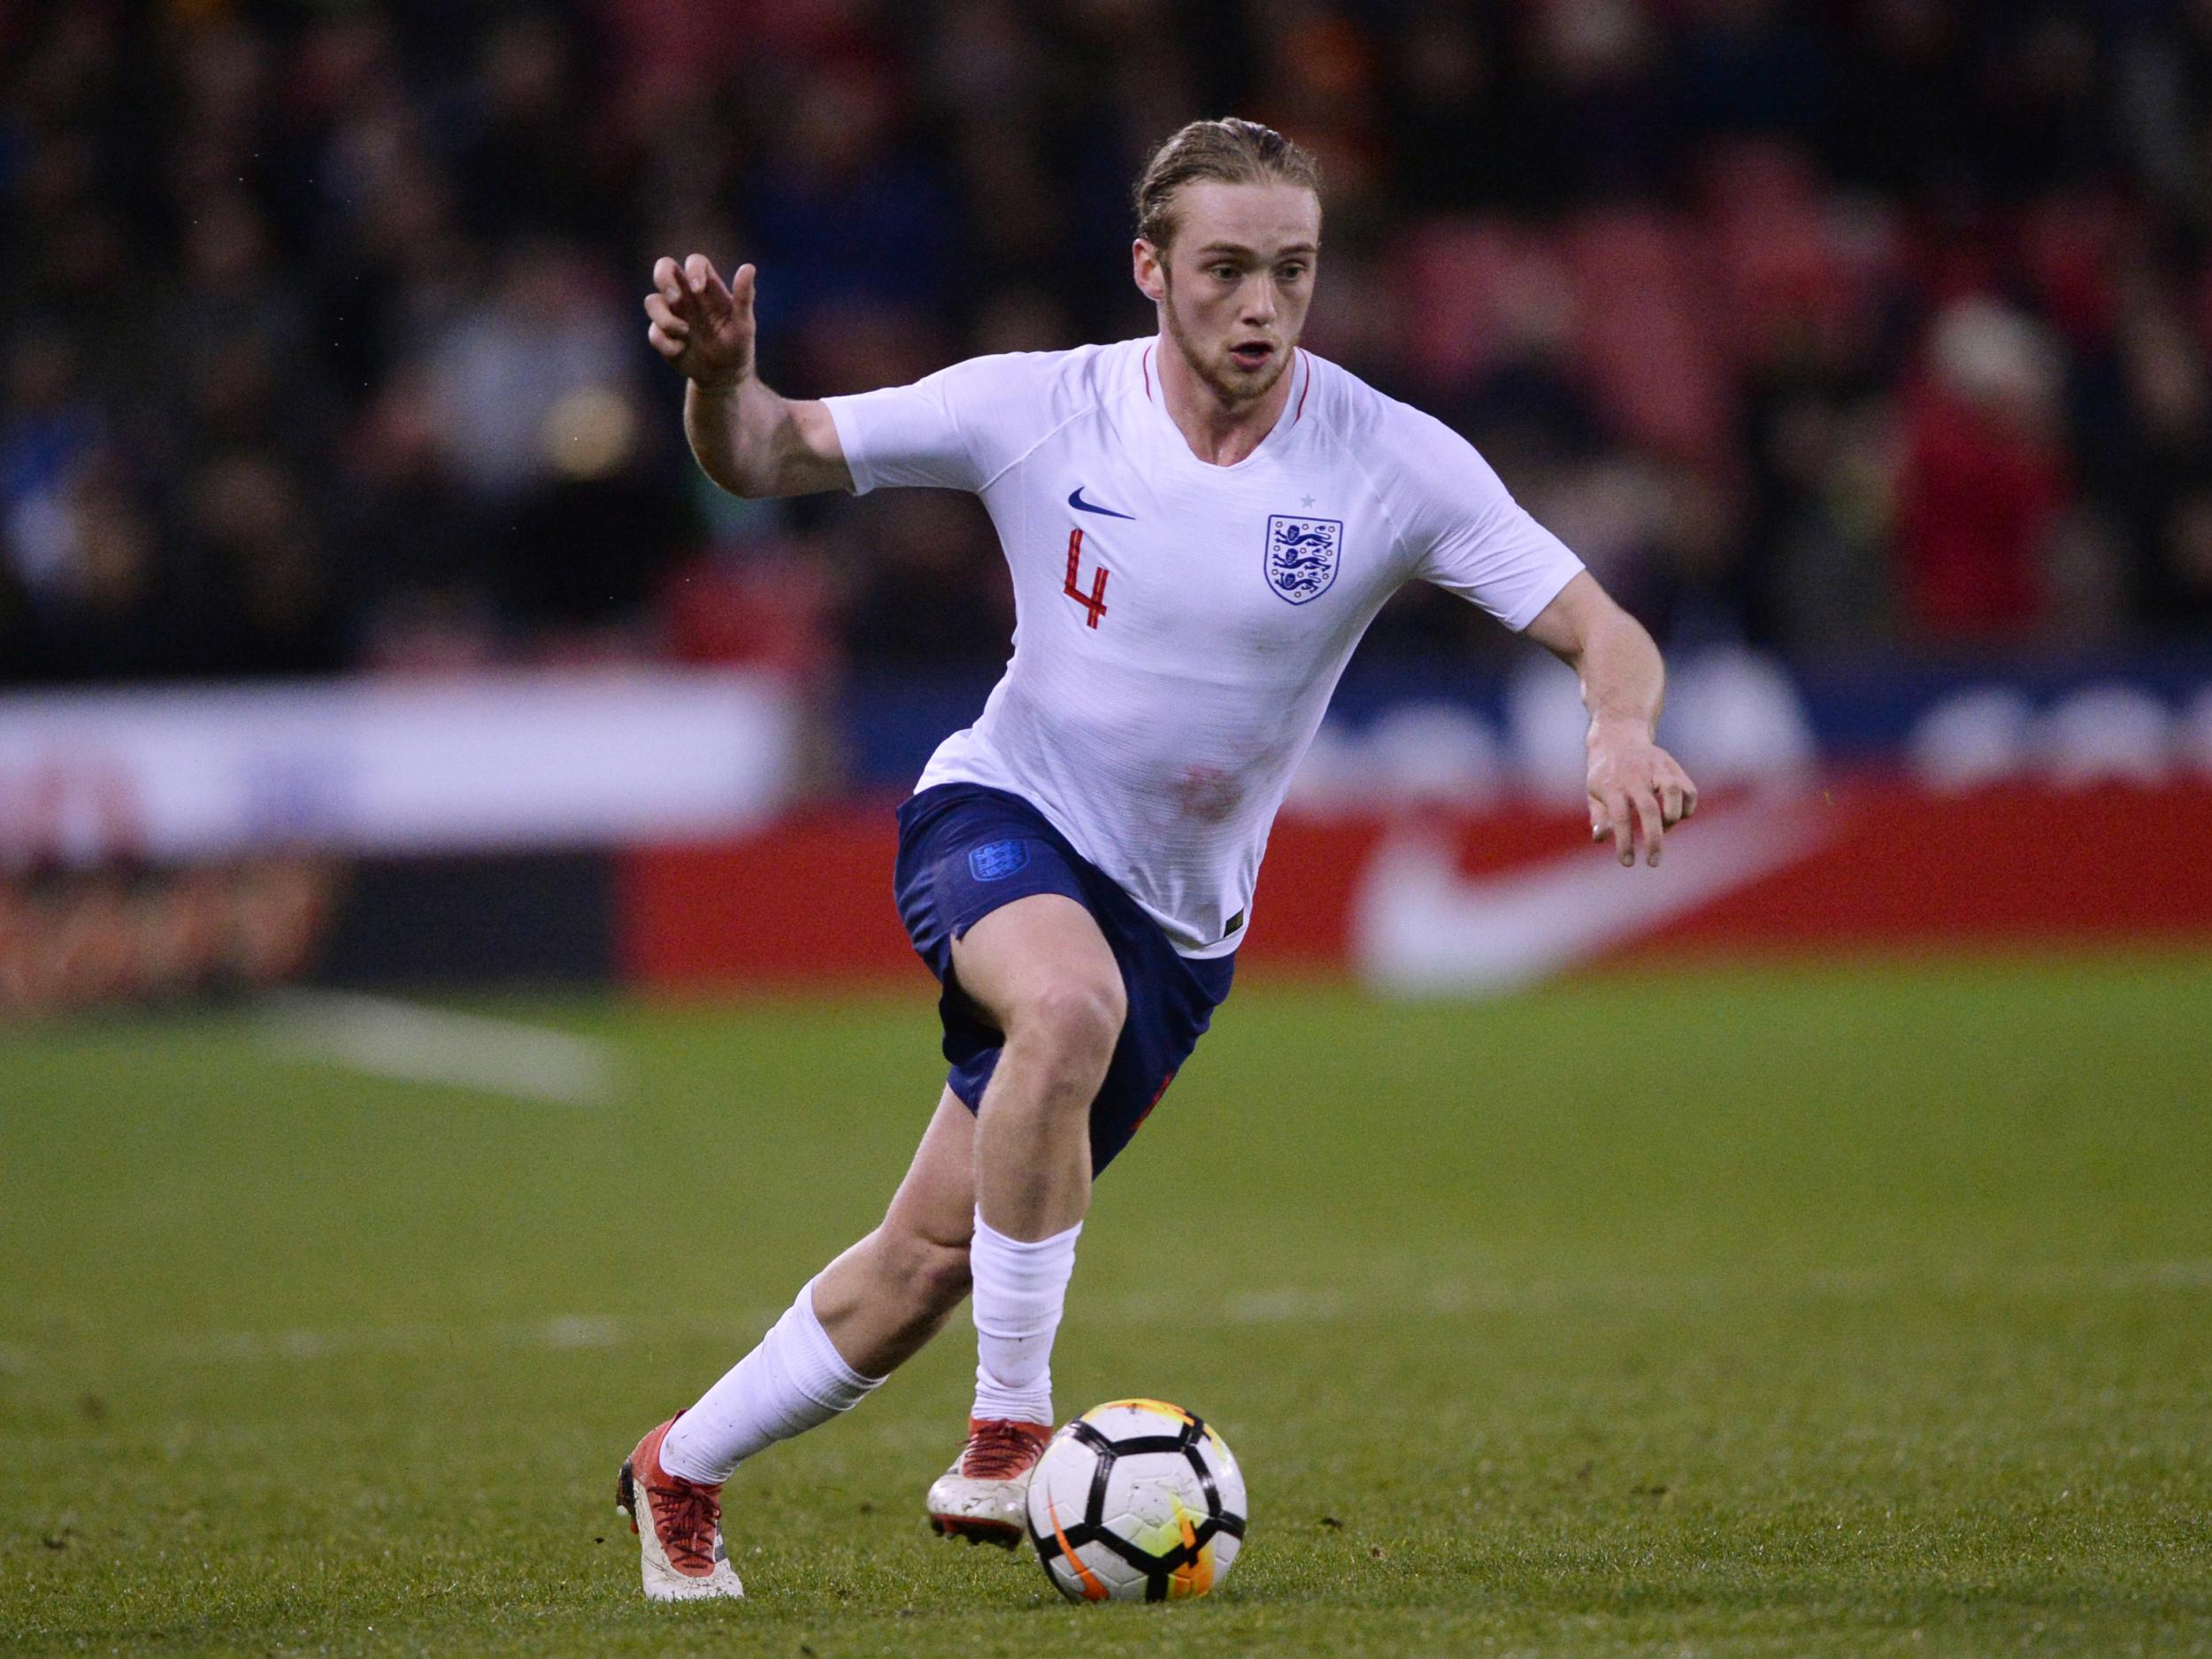 Tom Davies is keen to make up for lost time with the England Under-21s after missing Euro 2019